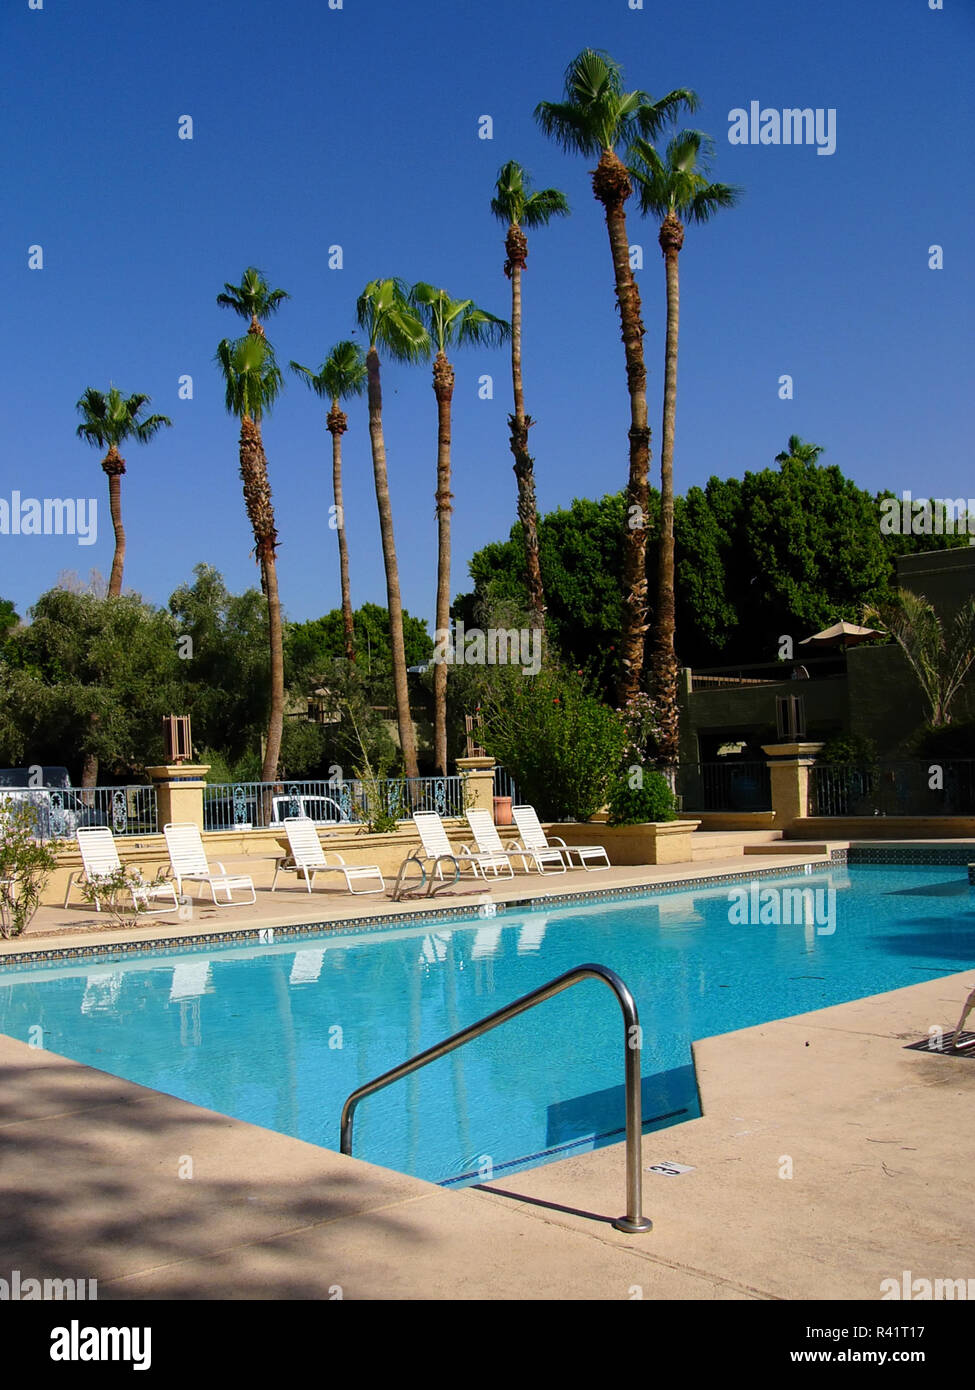 An outdoor swimming pool at a hotel in Arizona, USA Stock Photo